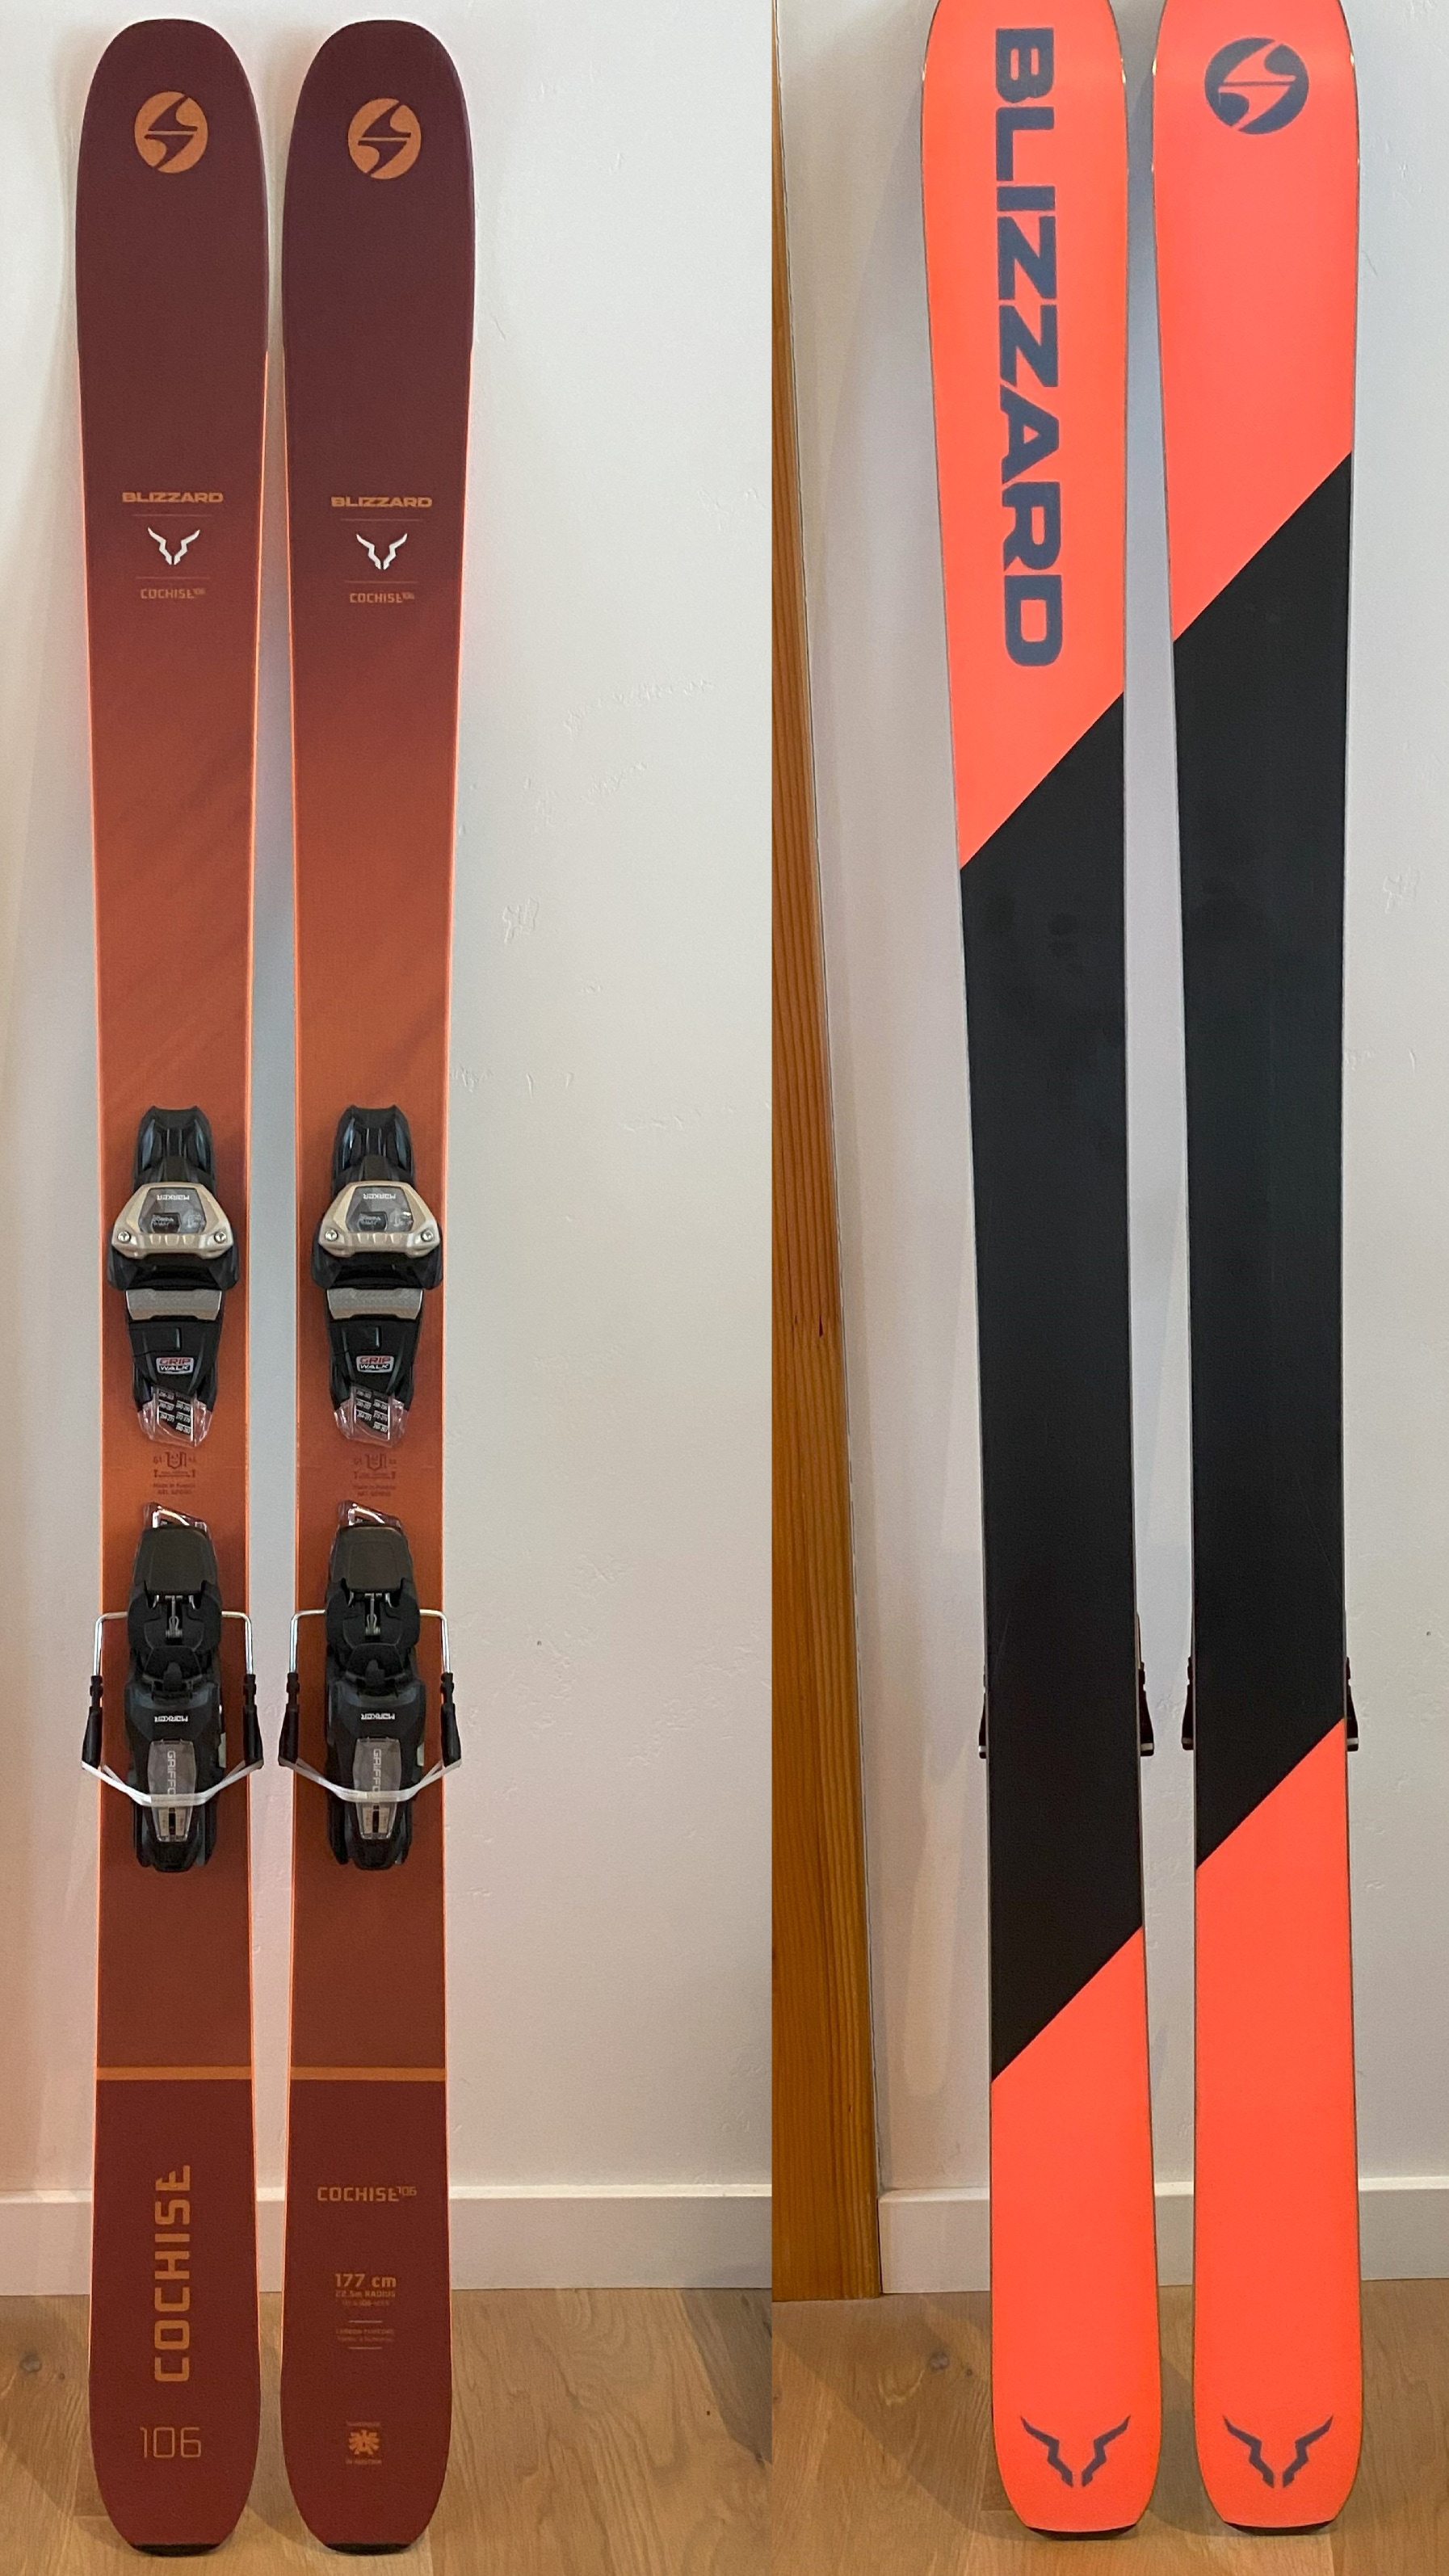 New 2022-2023 Blizzard Cochise 177 cm Freeride Skis With Marker Griffon 13 bindings